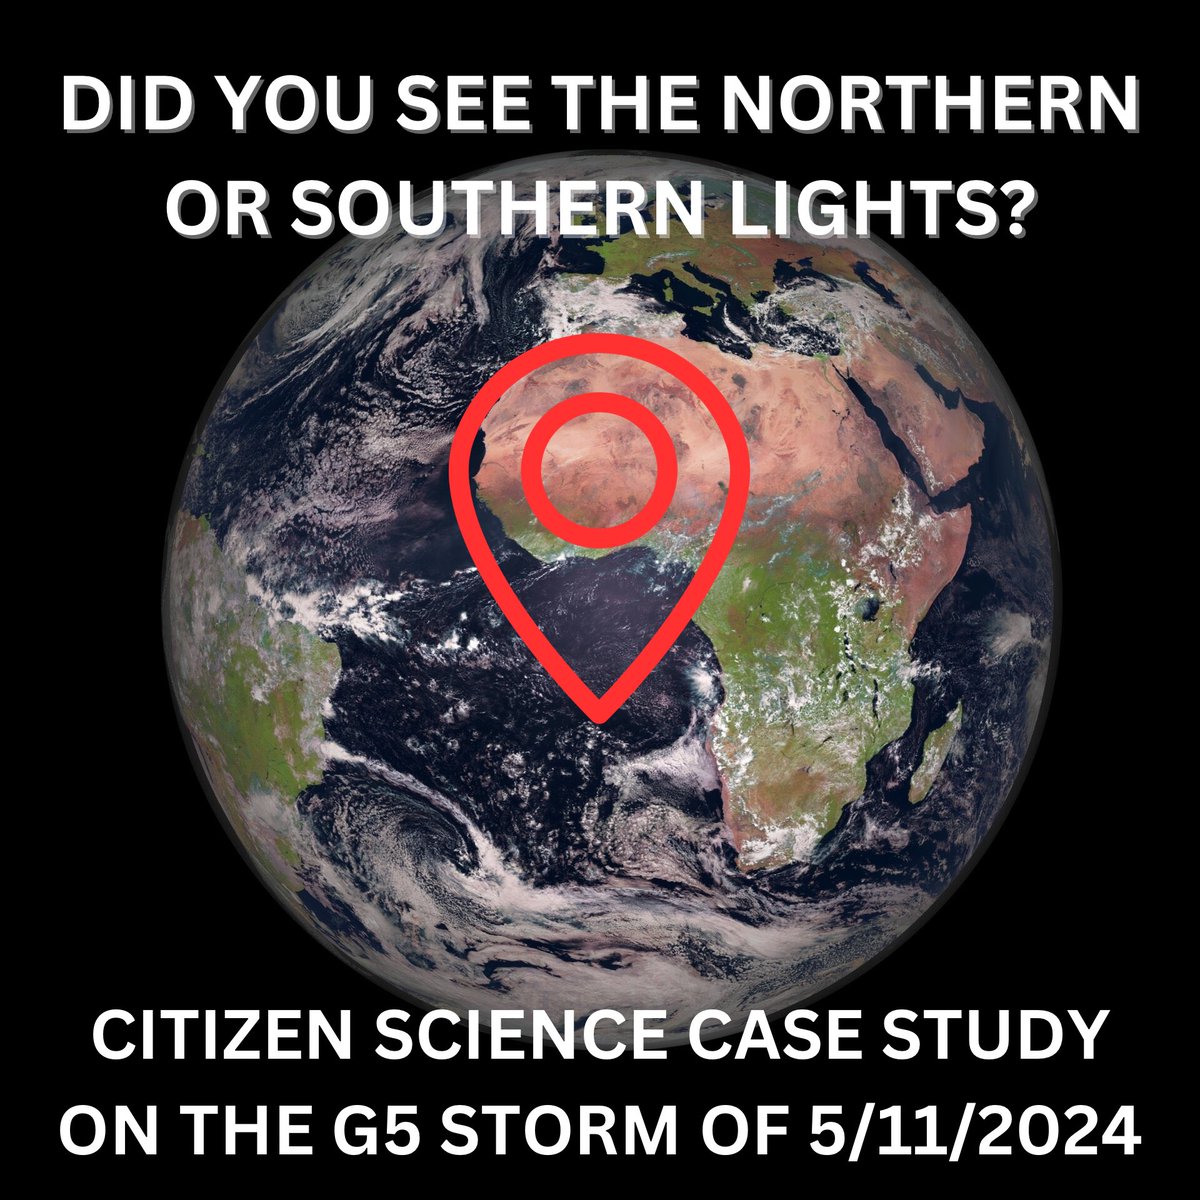 Did you see it? I am attempting a massive GLOBAL case study on the auroras seen around the world during the historic G5 storm of 5/11/2024 1) Where did you see it? (City or county!) 2) A picture to verify!